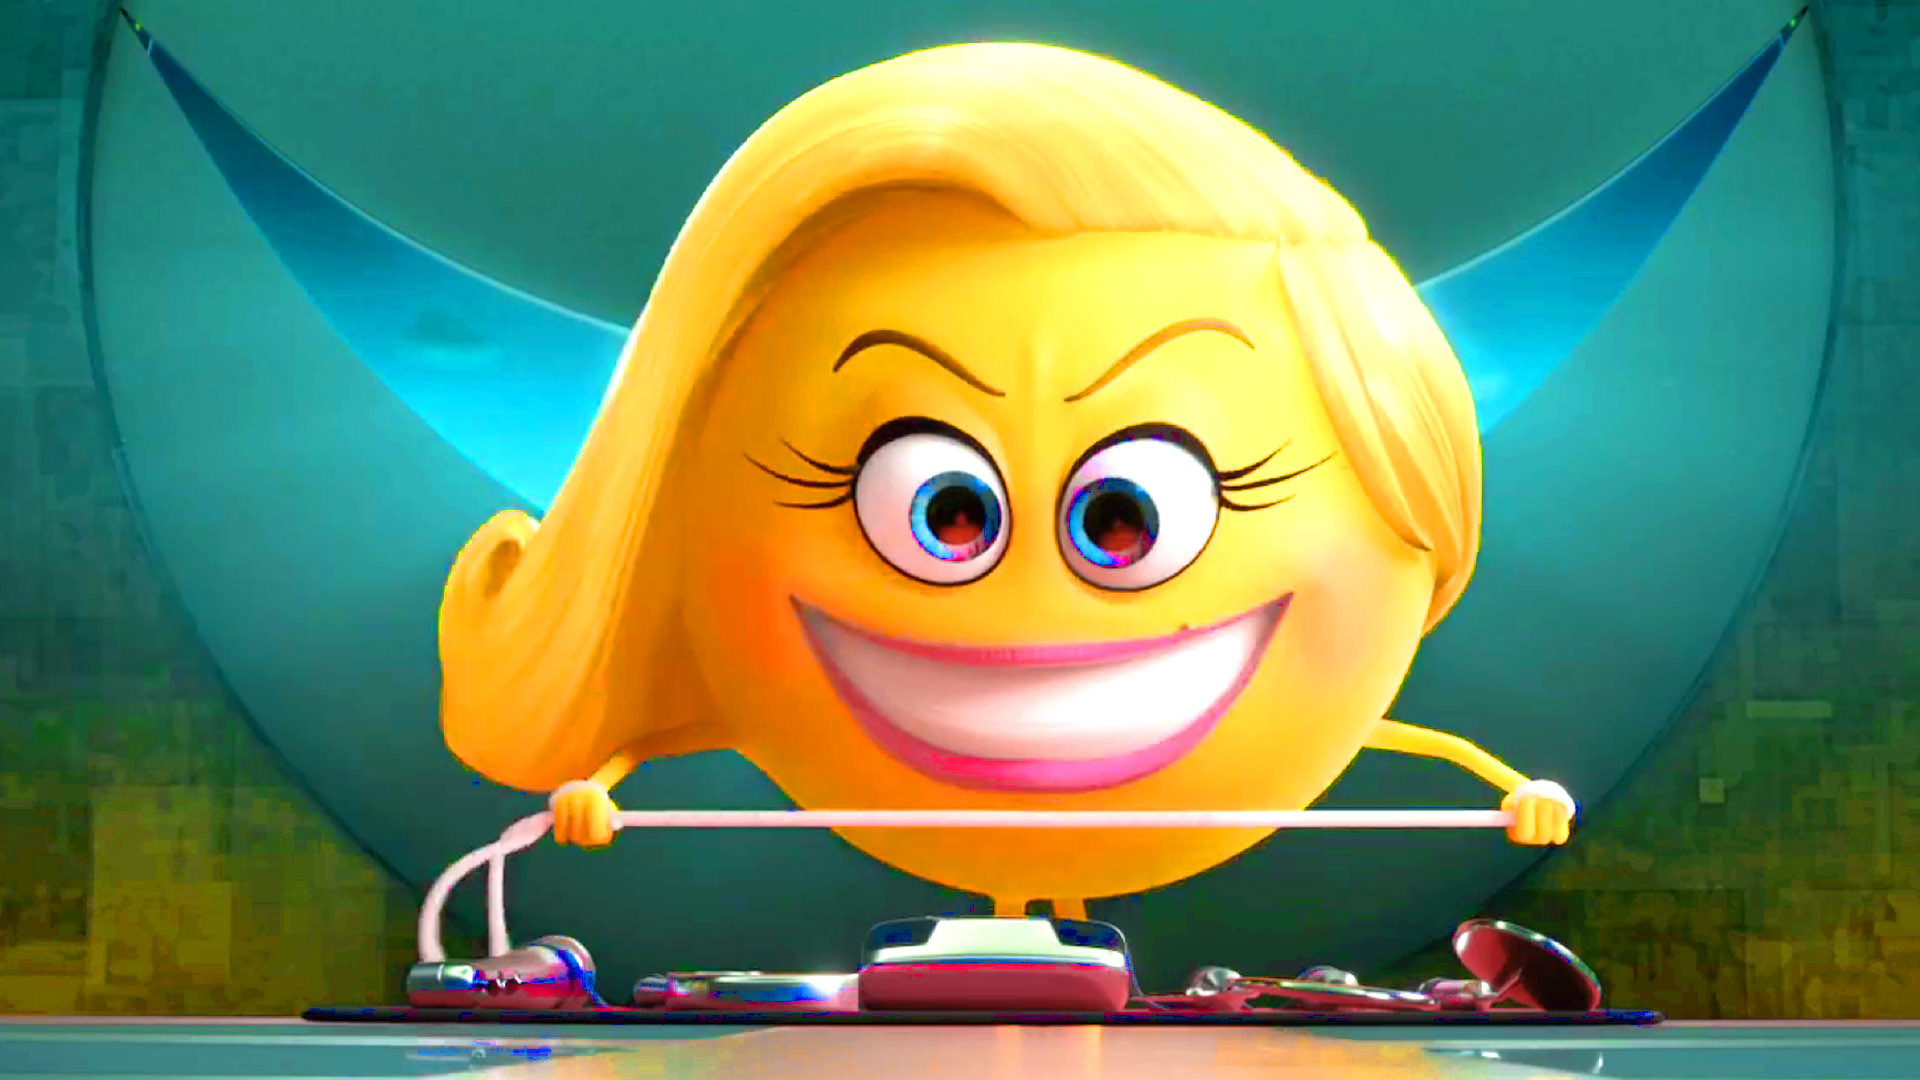 1920x1080 All Movie Posters and Prints for The Emoji Movie JoBlo Posters 1920Ã1080